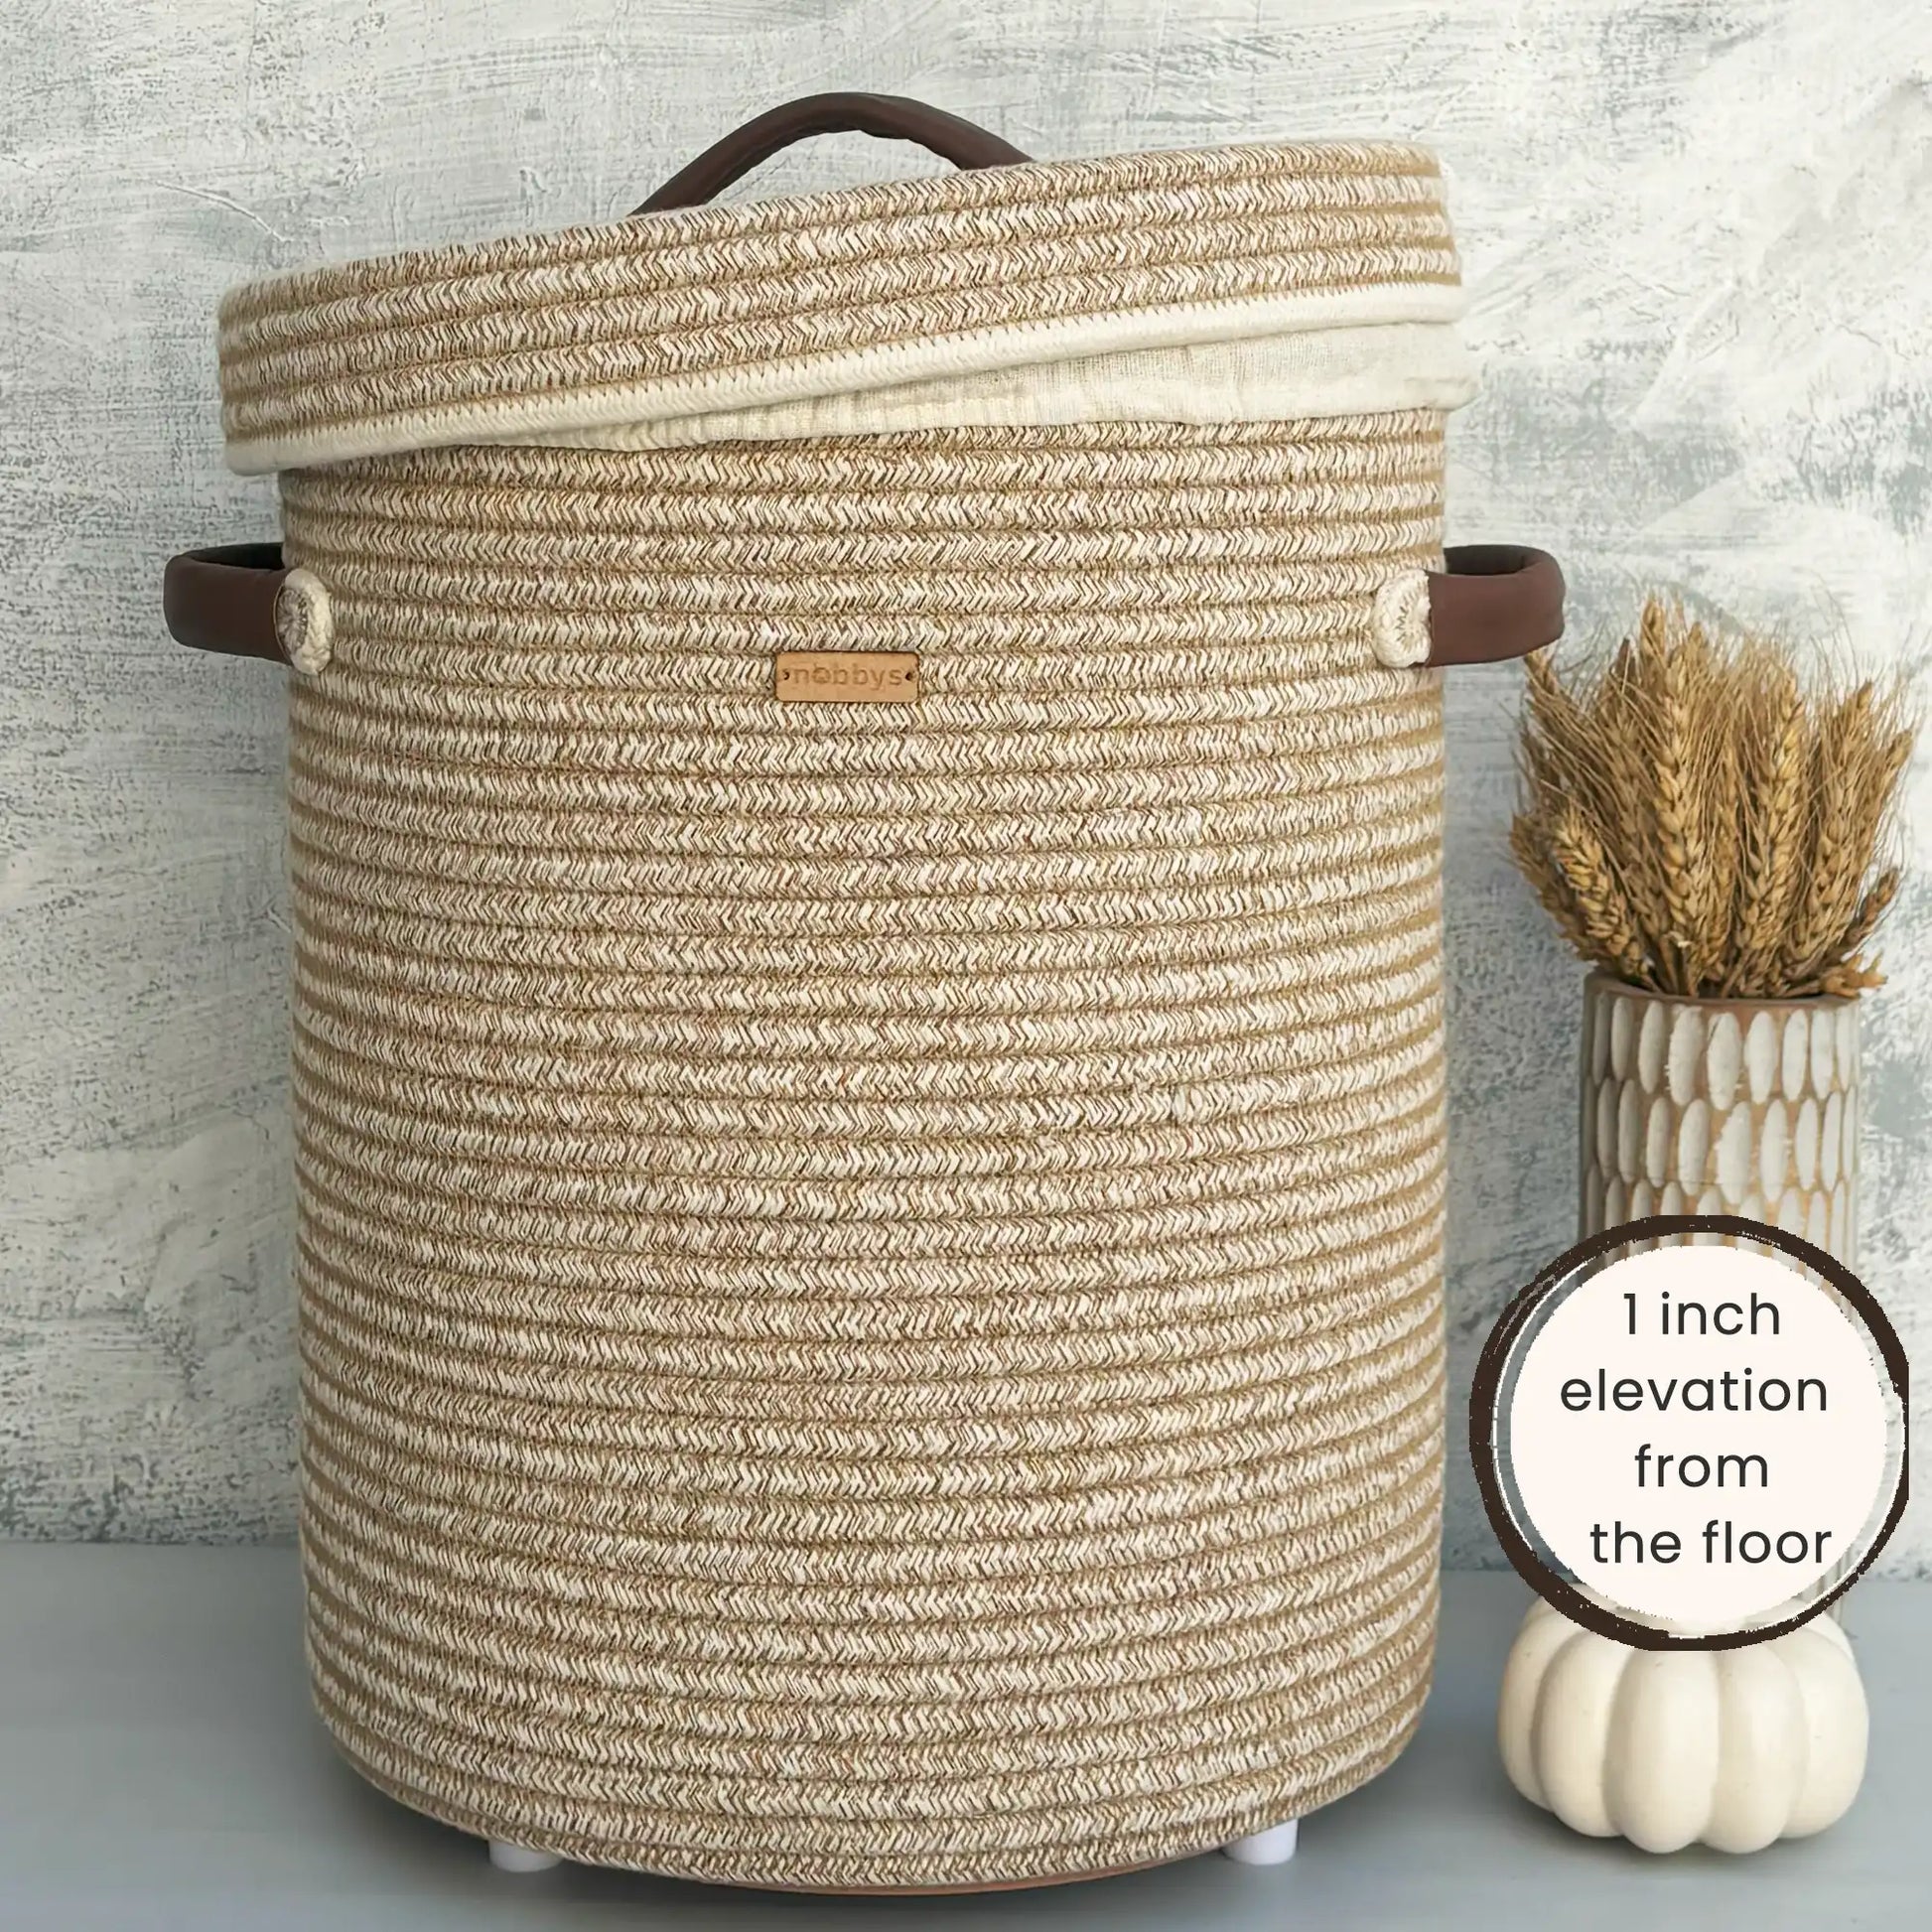 cotton laundry basket with leather handlescotton laundry basket with leather handles